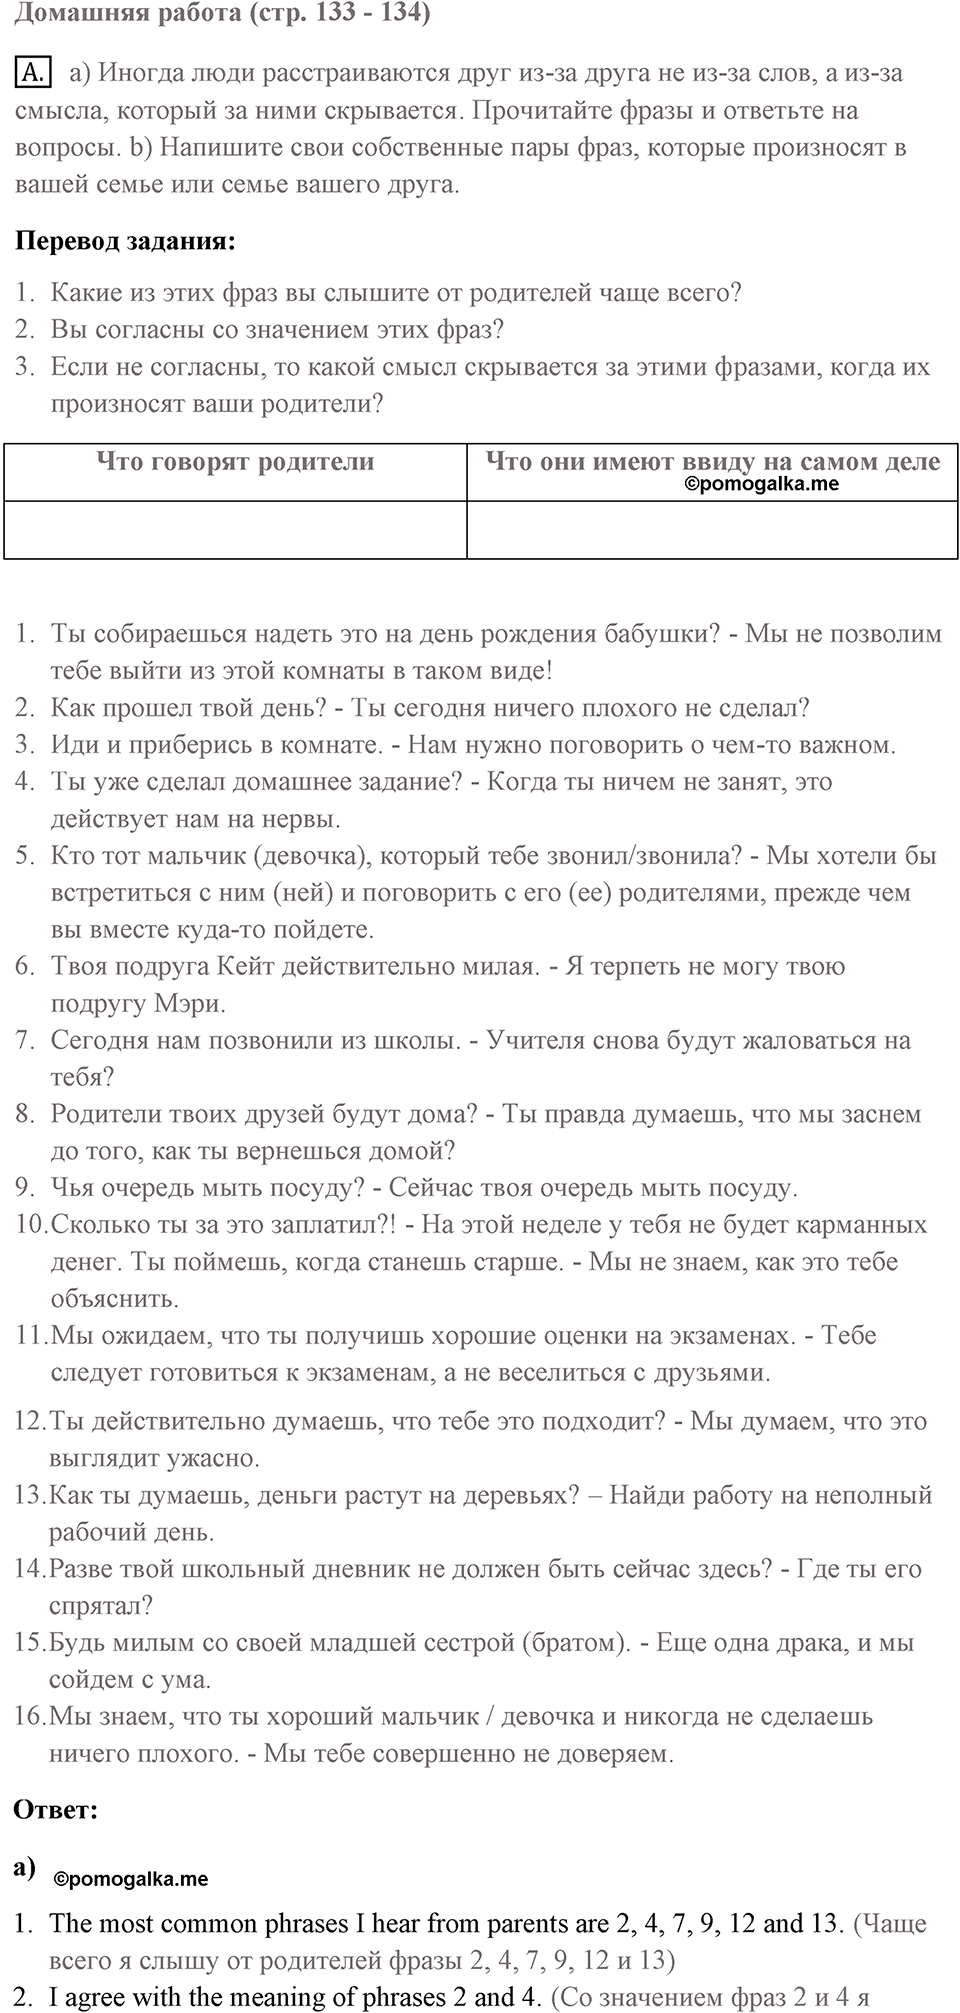 Unit 4 lesson 5-6 exercise №a английский язык 9 класс Happy English.ru